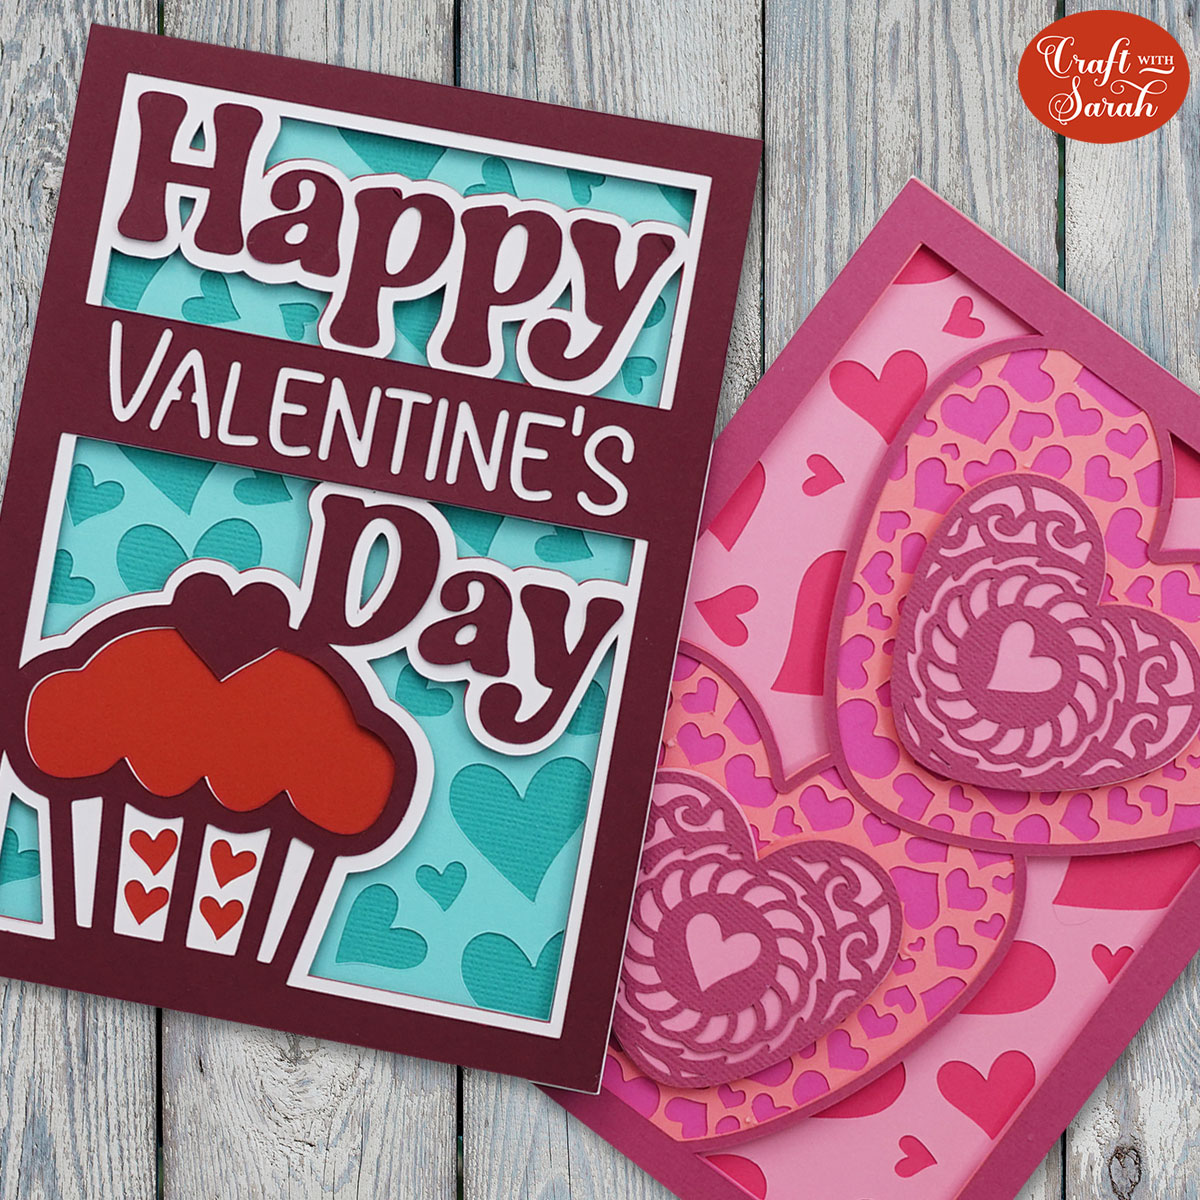 Easy Valentine's Day Cards 💖 2 Free Valentine card SVGs! - Craft with Sarah